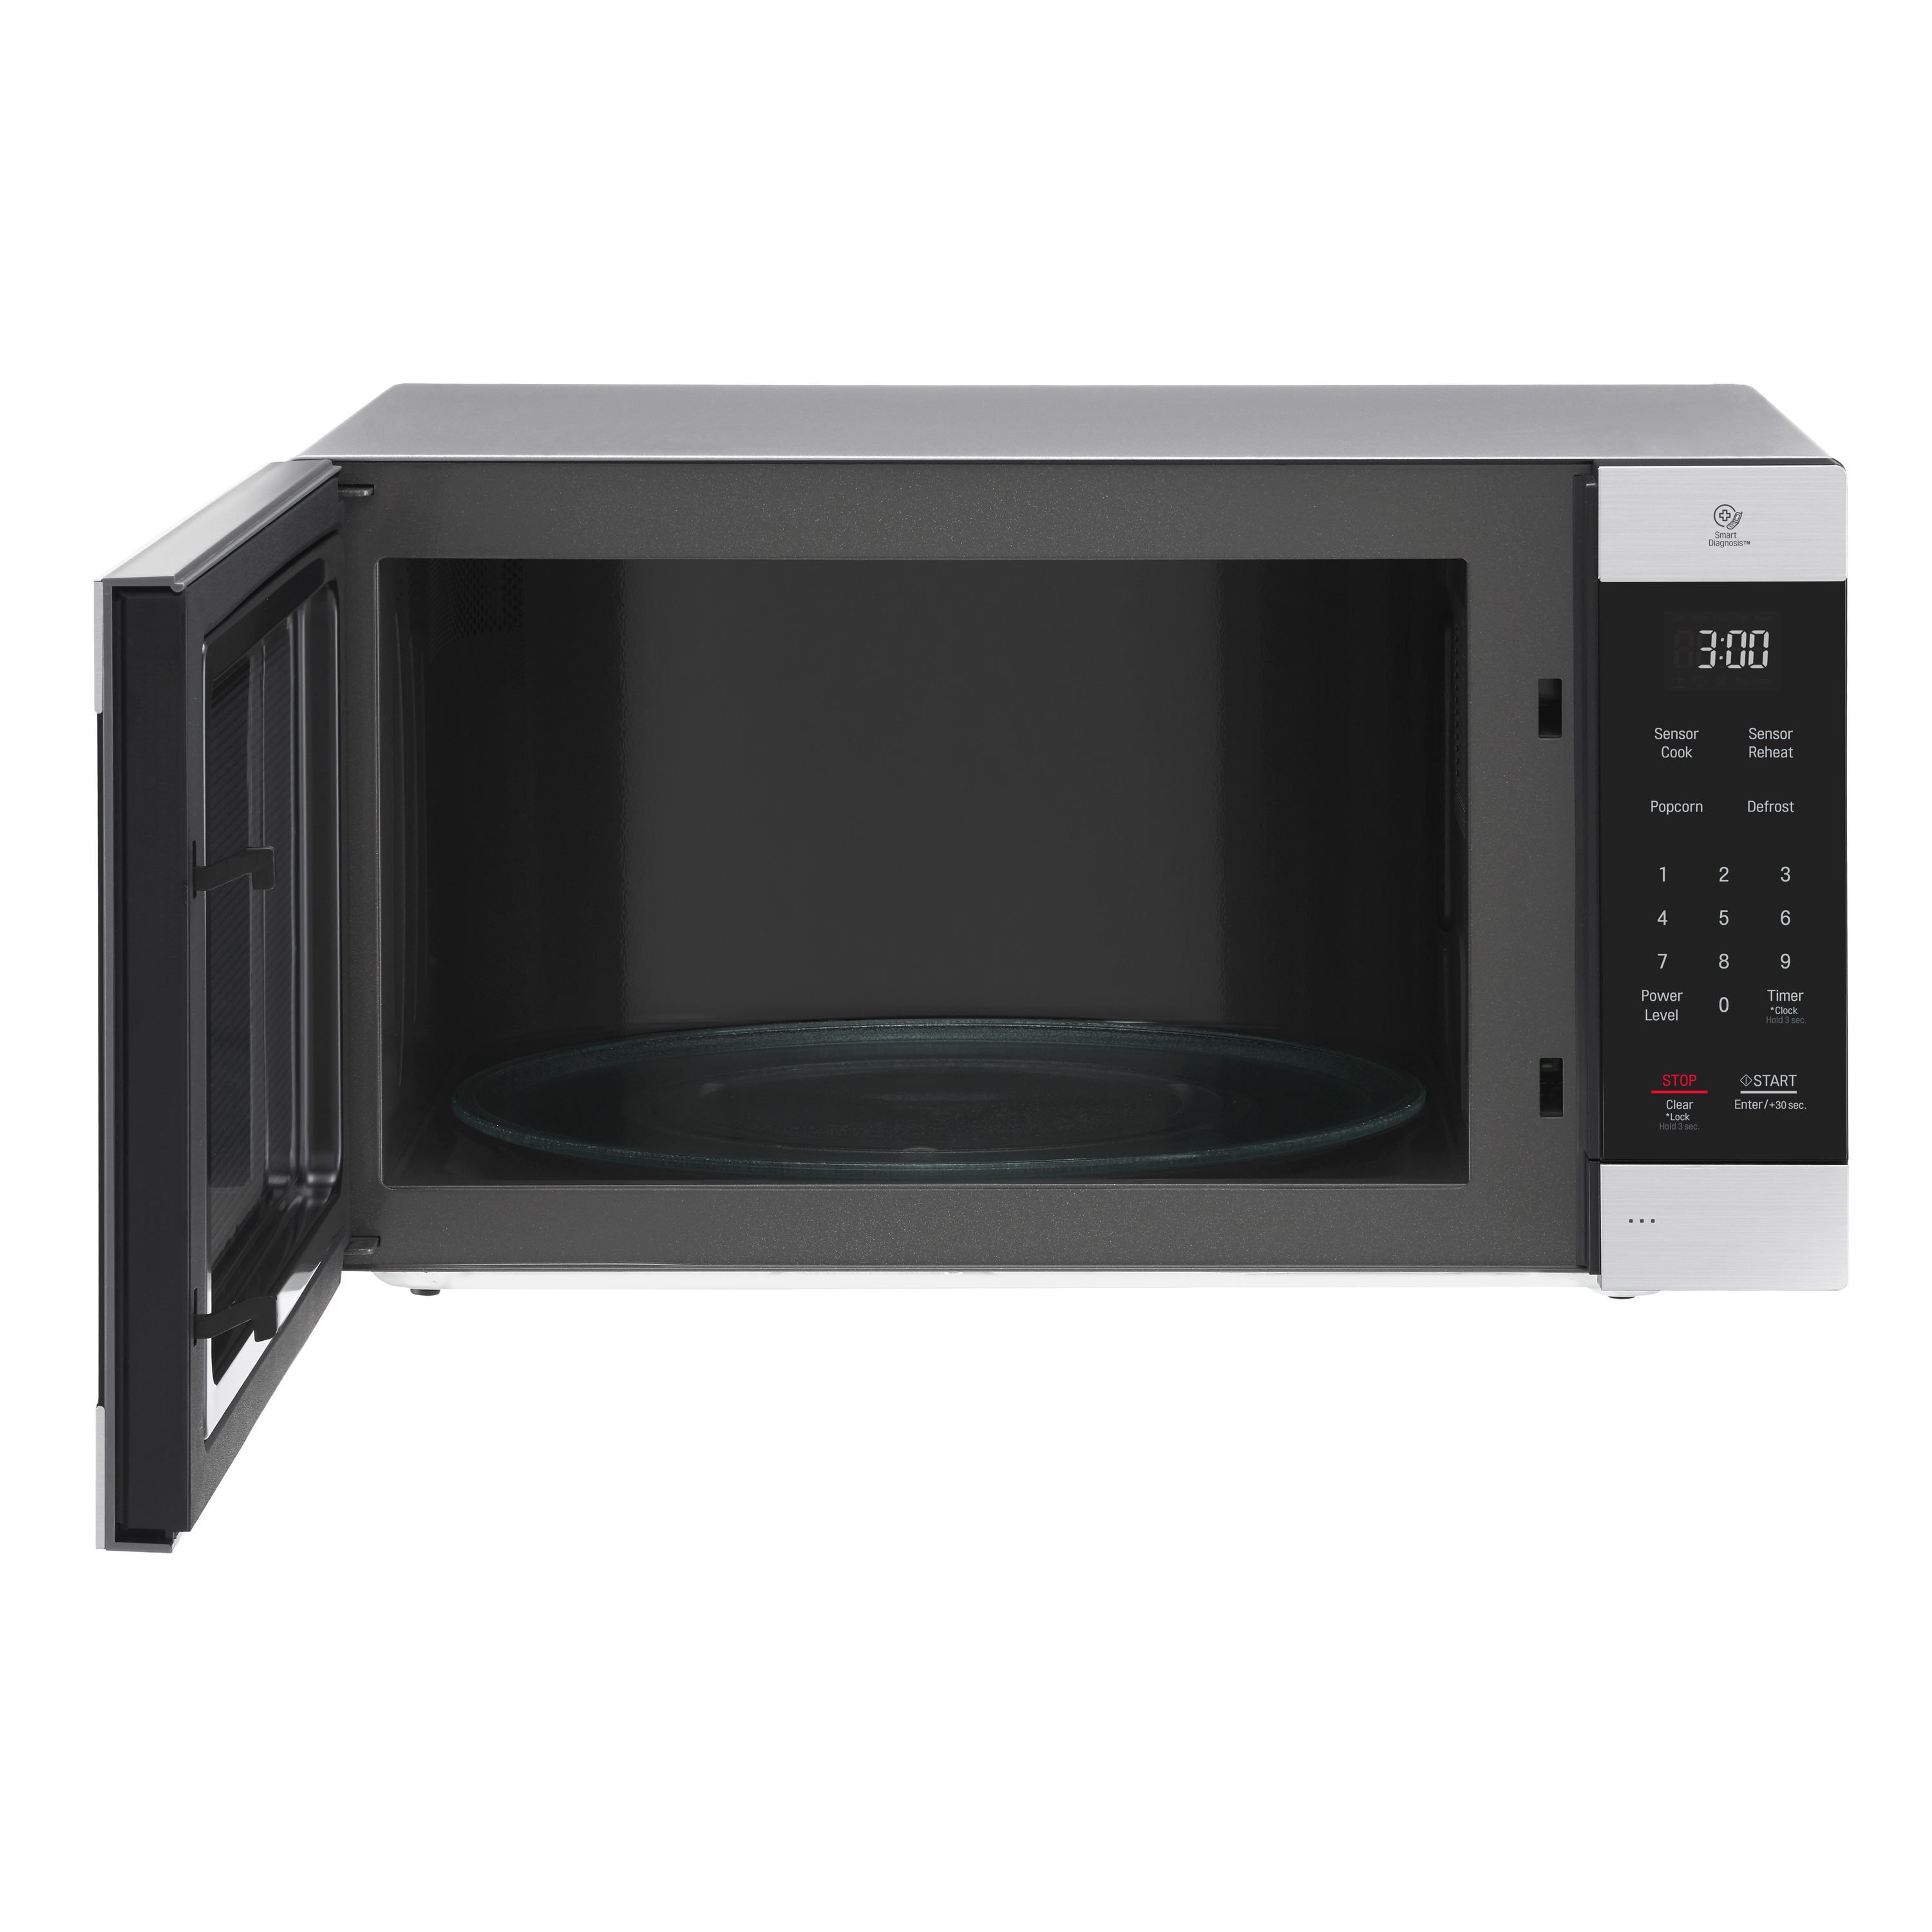 LG LCRM1240ST 1.2 Cu. Ft. Countertop Combination Microwave 